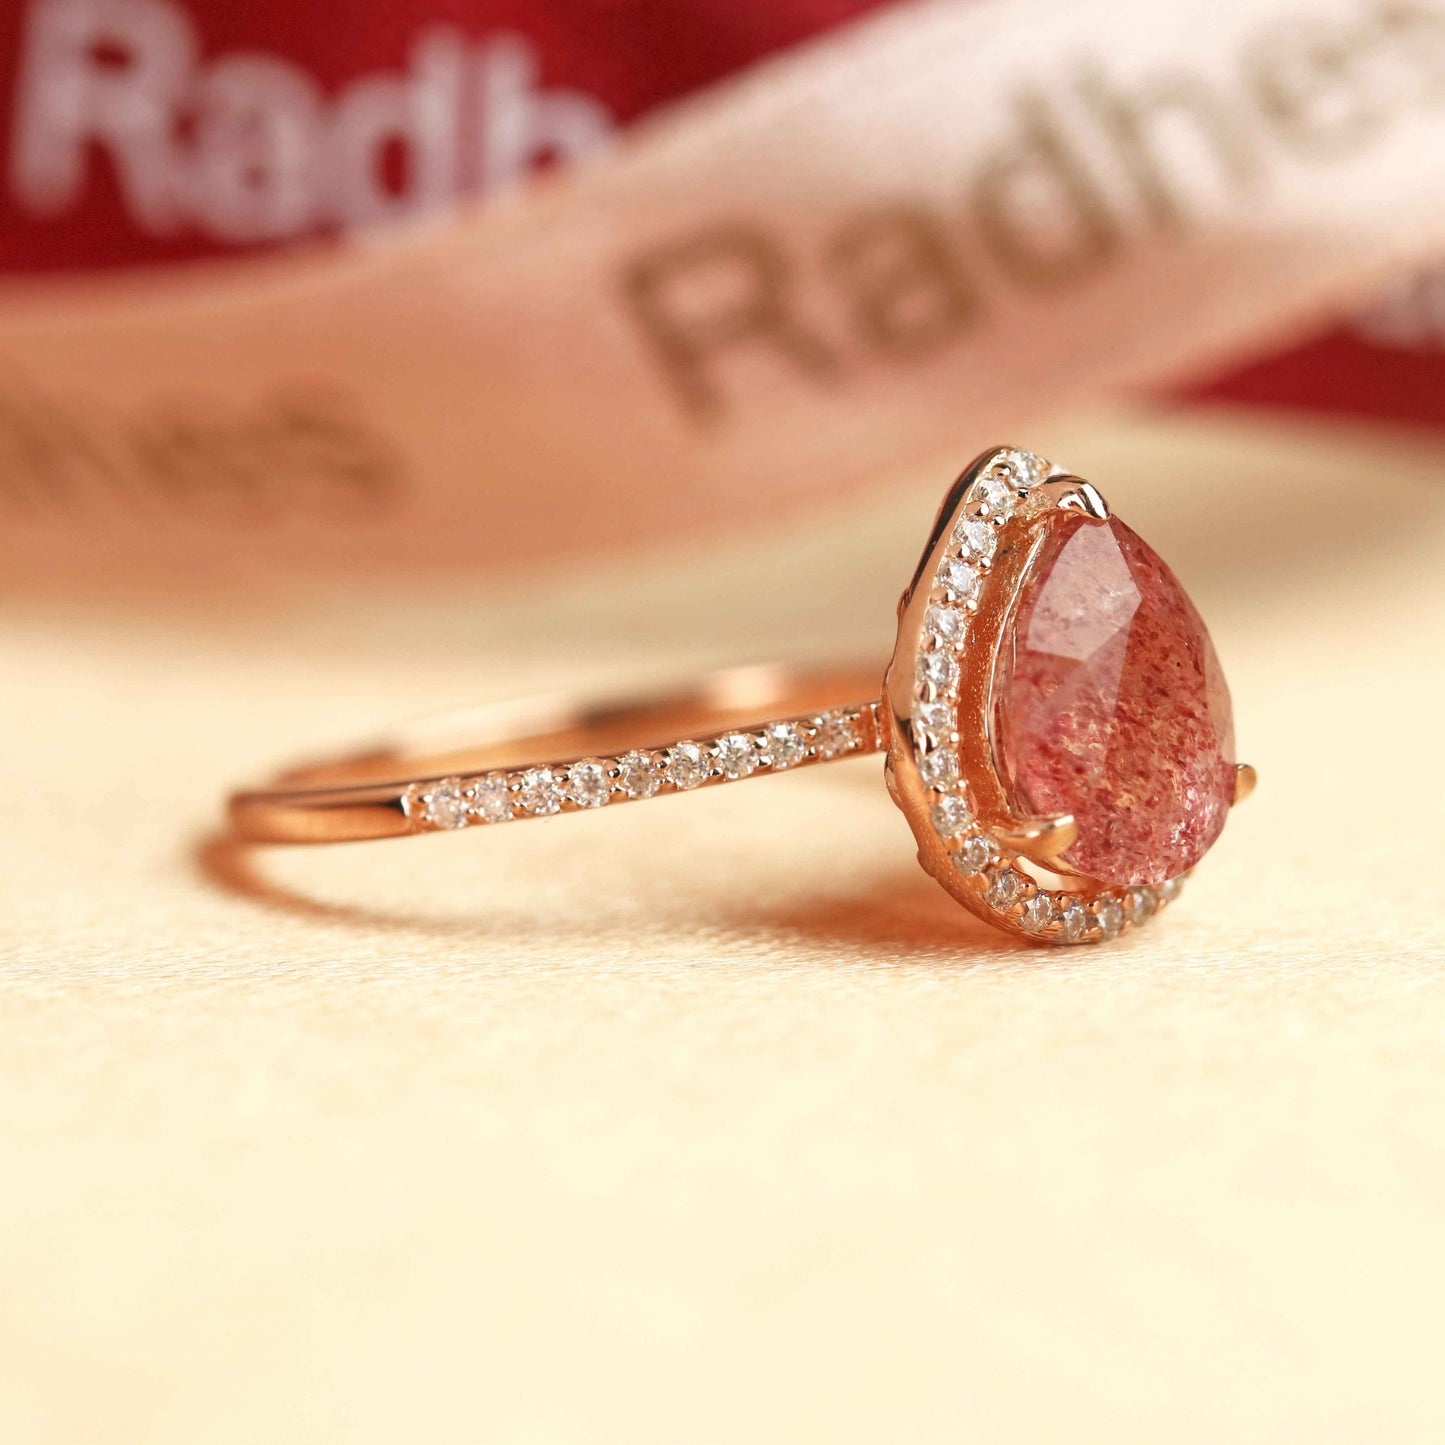 Halo 1.5 carat Tear Drop Cut Strawberry Quartz and Diamond Half-pave Wedding Ring for Women in Rose Gold